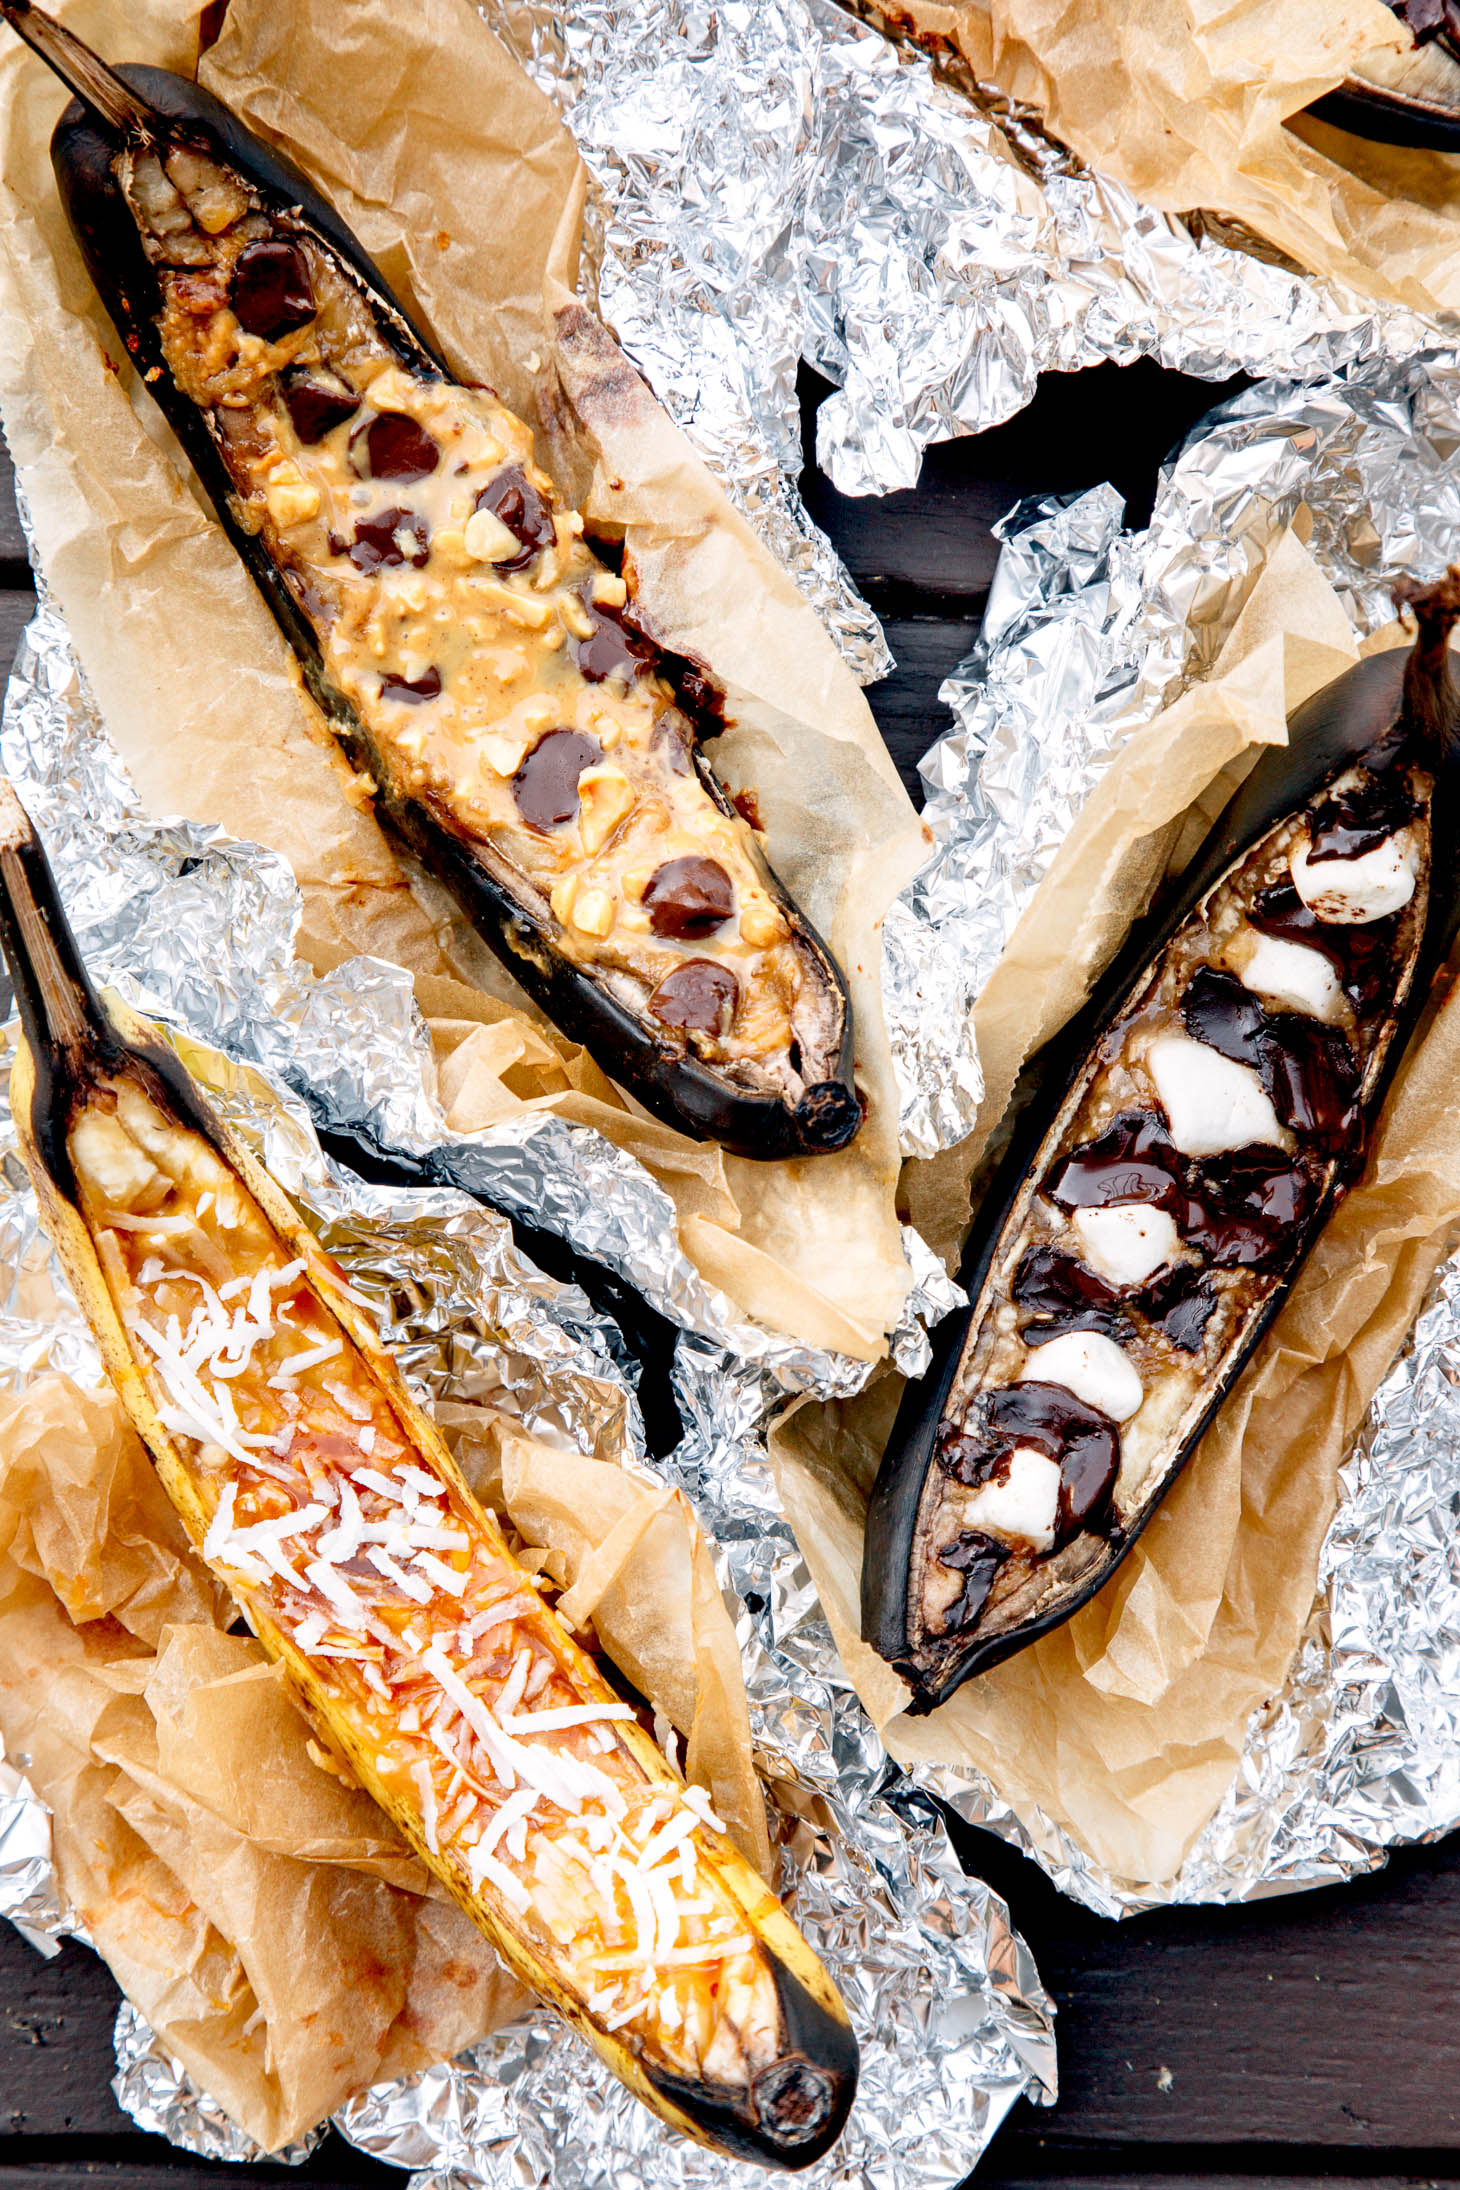 Easy camp cooking: Campfire Banana Boat dessert, cooked right on the grill!